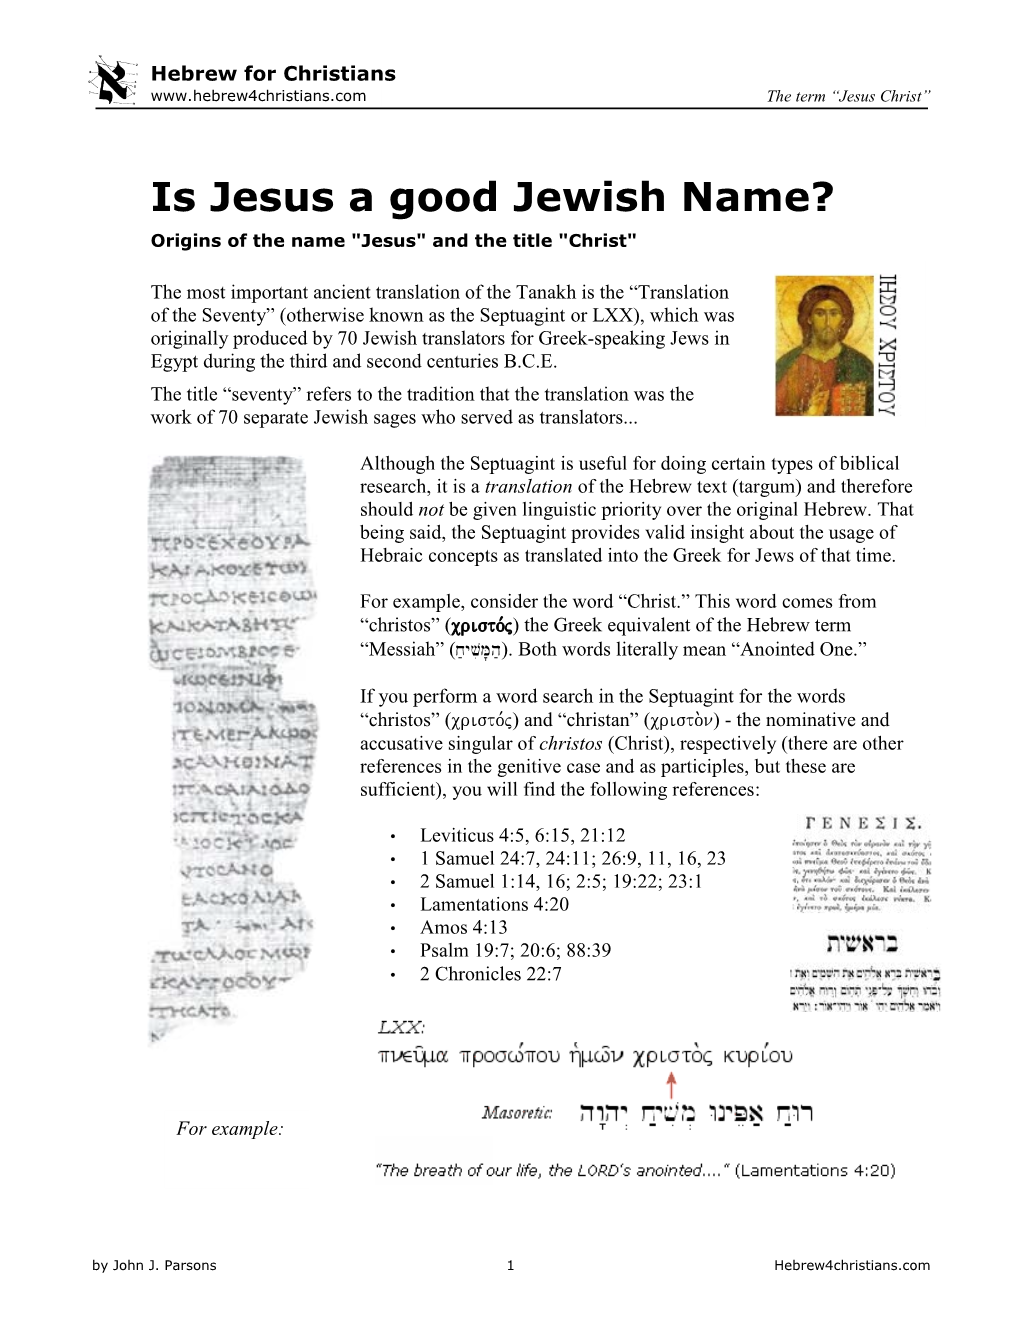 Is Jesus a Good Jewish Name? Origins of the Name "Jesus" and the Title "Christ"